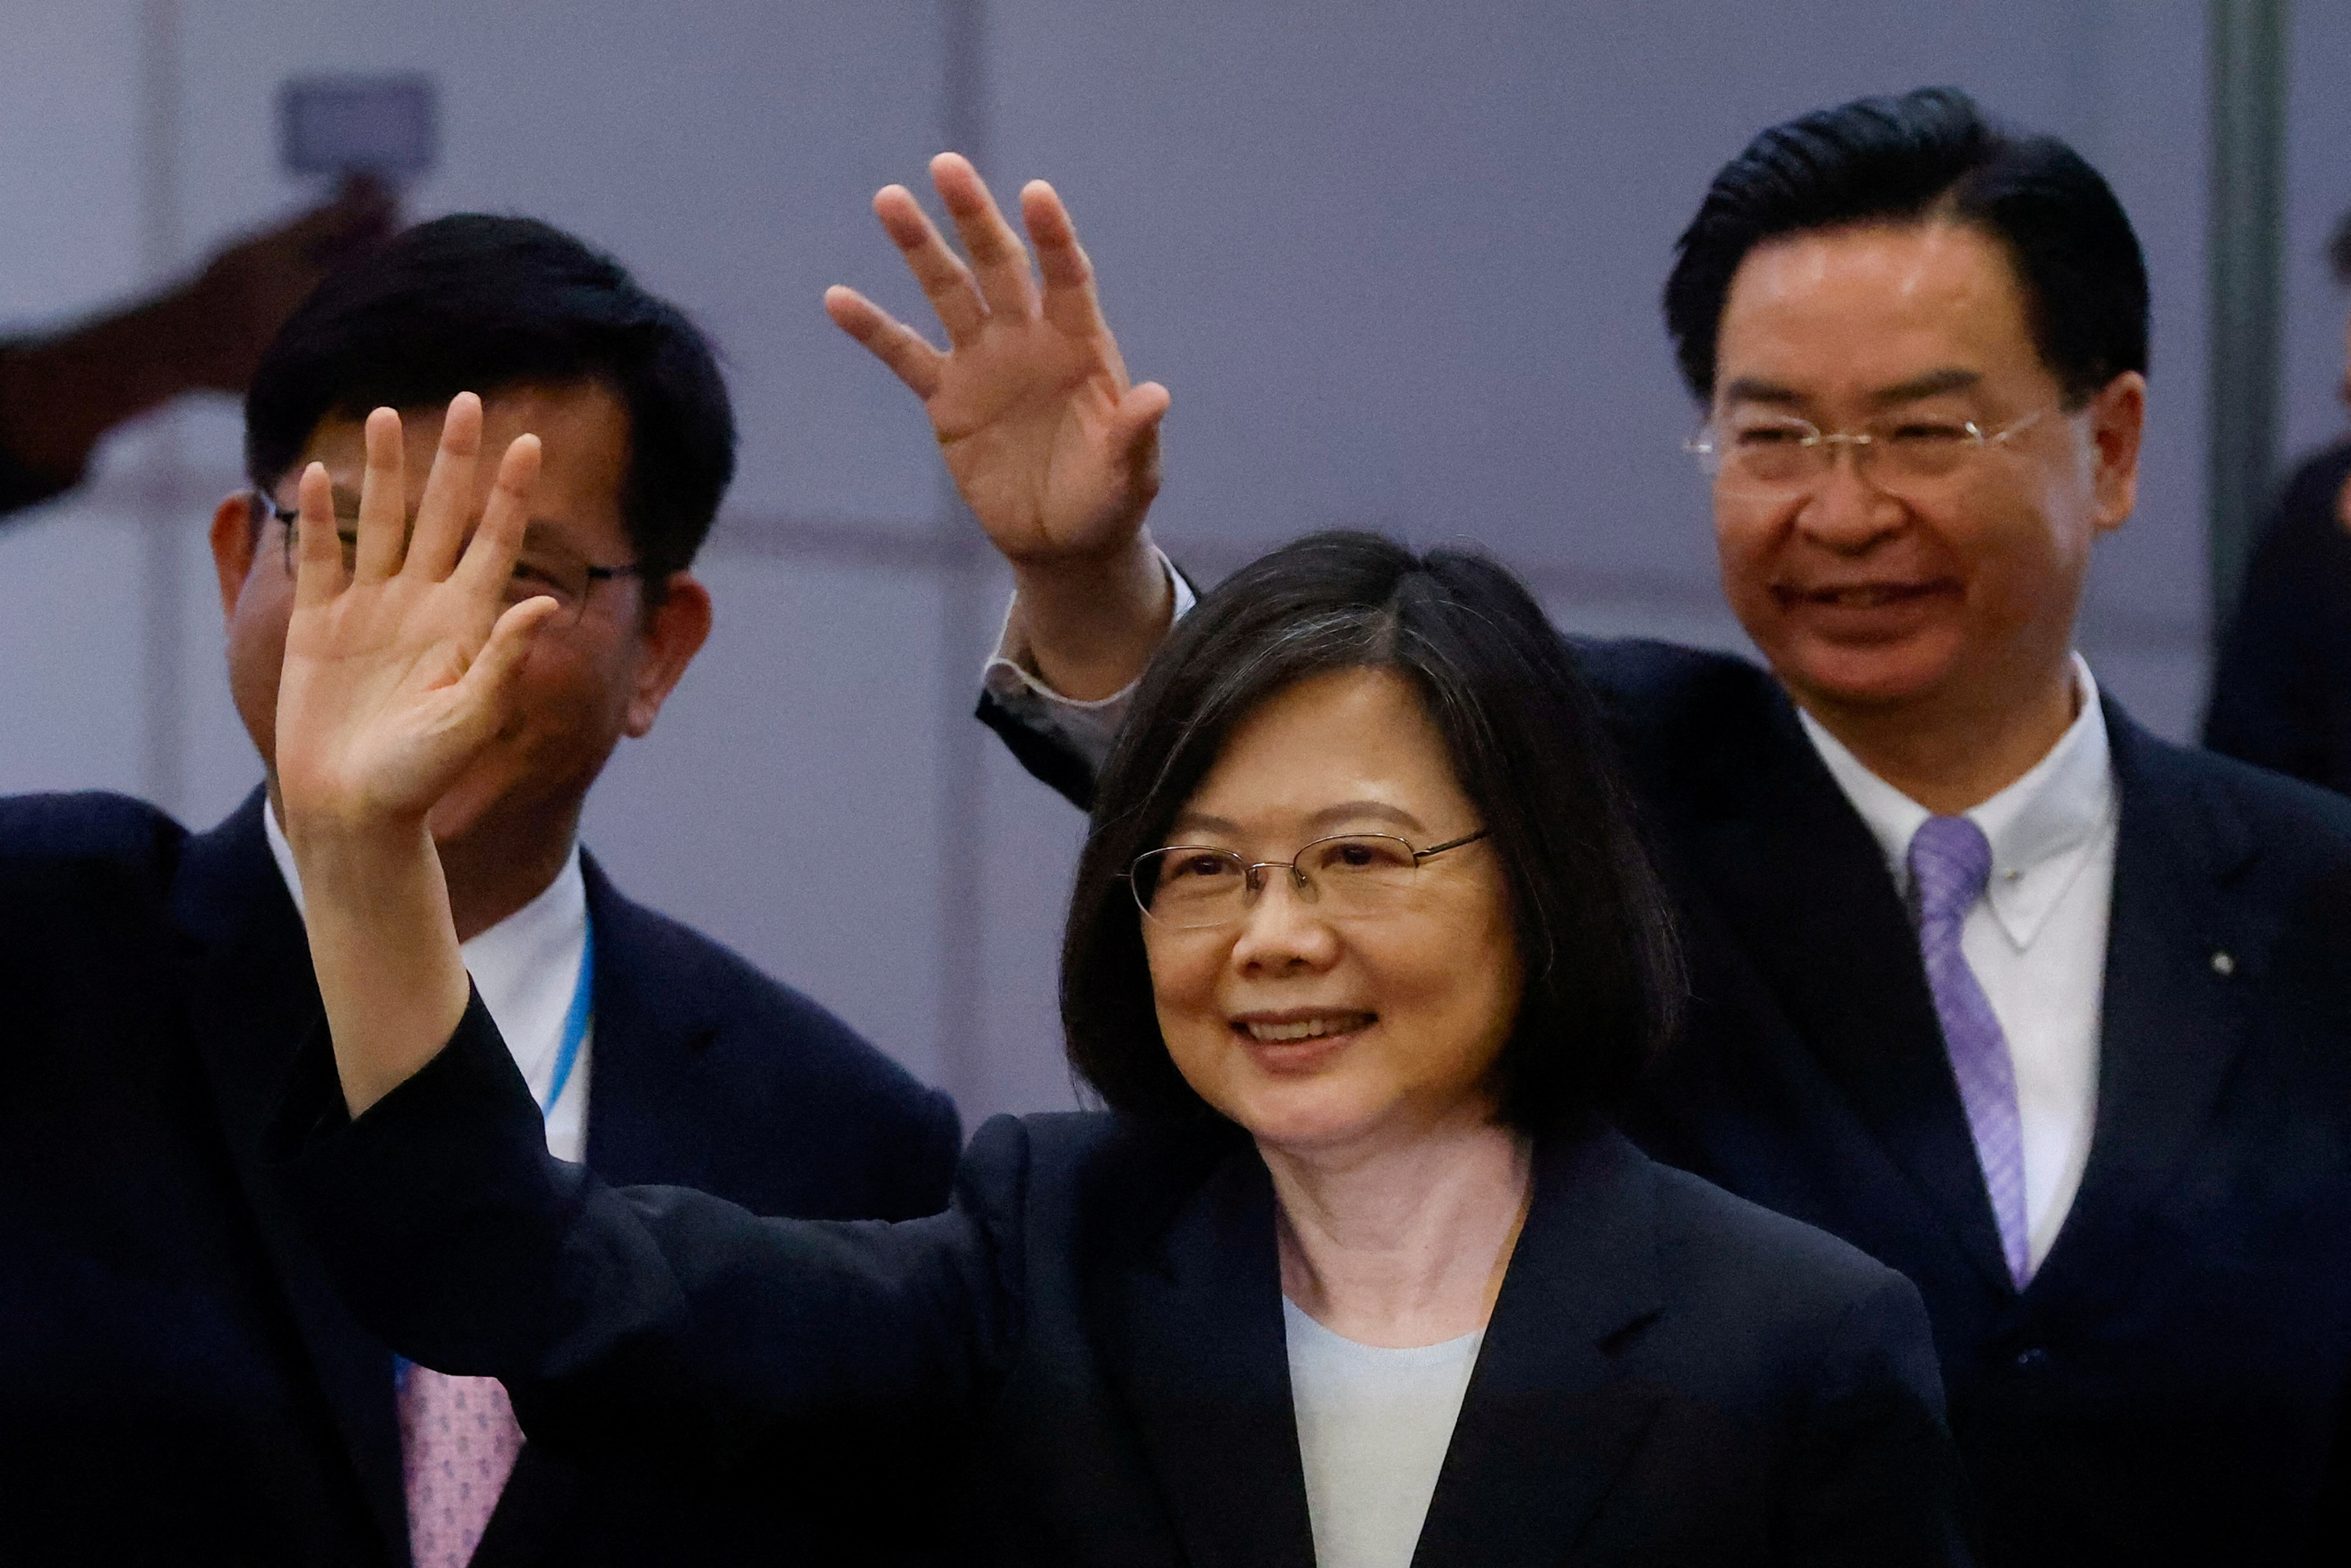 Taiwanese President Tsai Ing-wen waves to the media before her departure to New York to start her trip to Guatemala and Belize